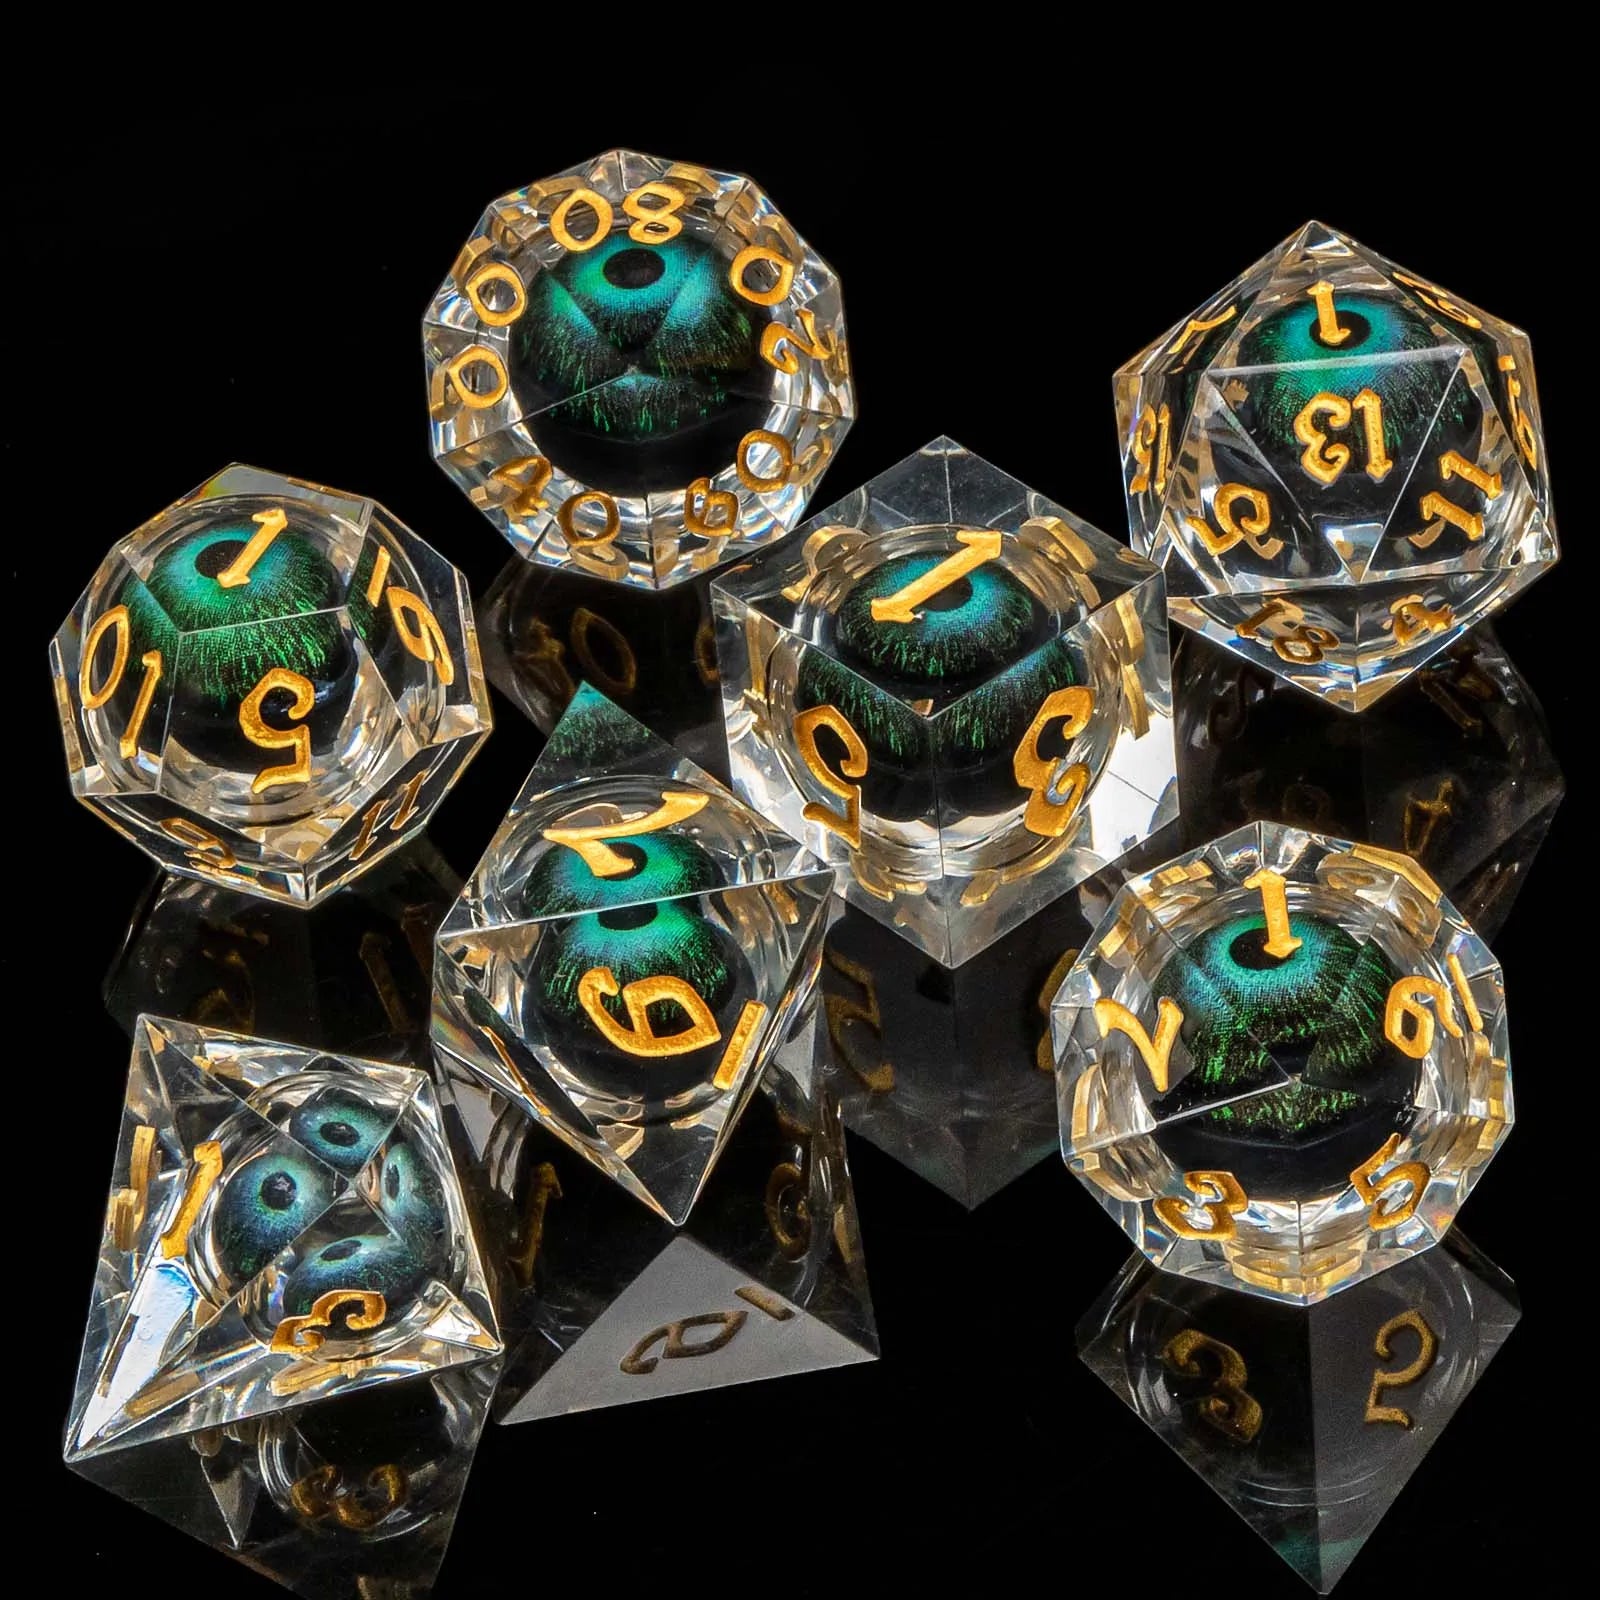 D and D Flowing Sand Sharp Edge Dragon Eye Dnd Resin RPG Polyhedral D&D Dice Set For Dungeon and Dragon Pathfinder Role Playing AZ14